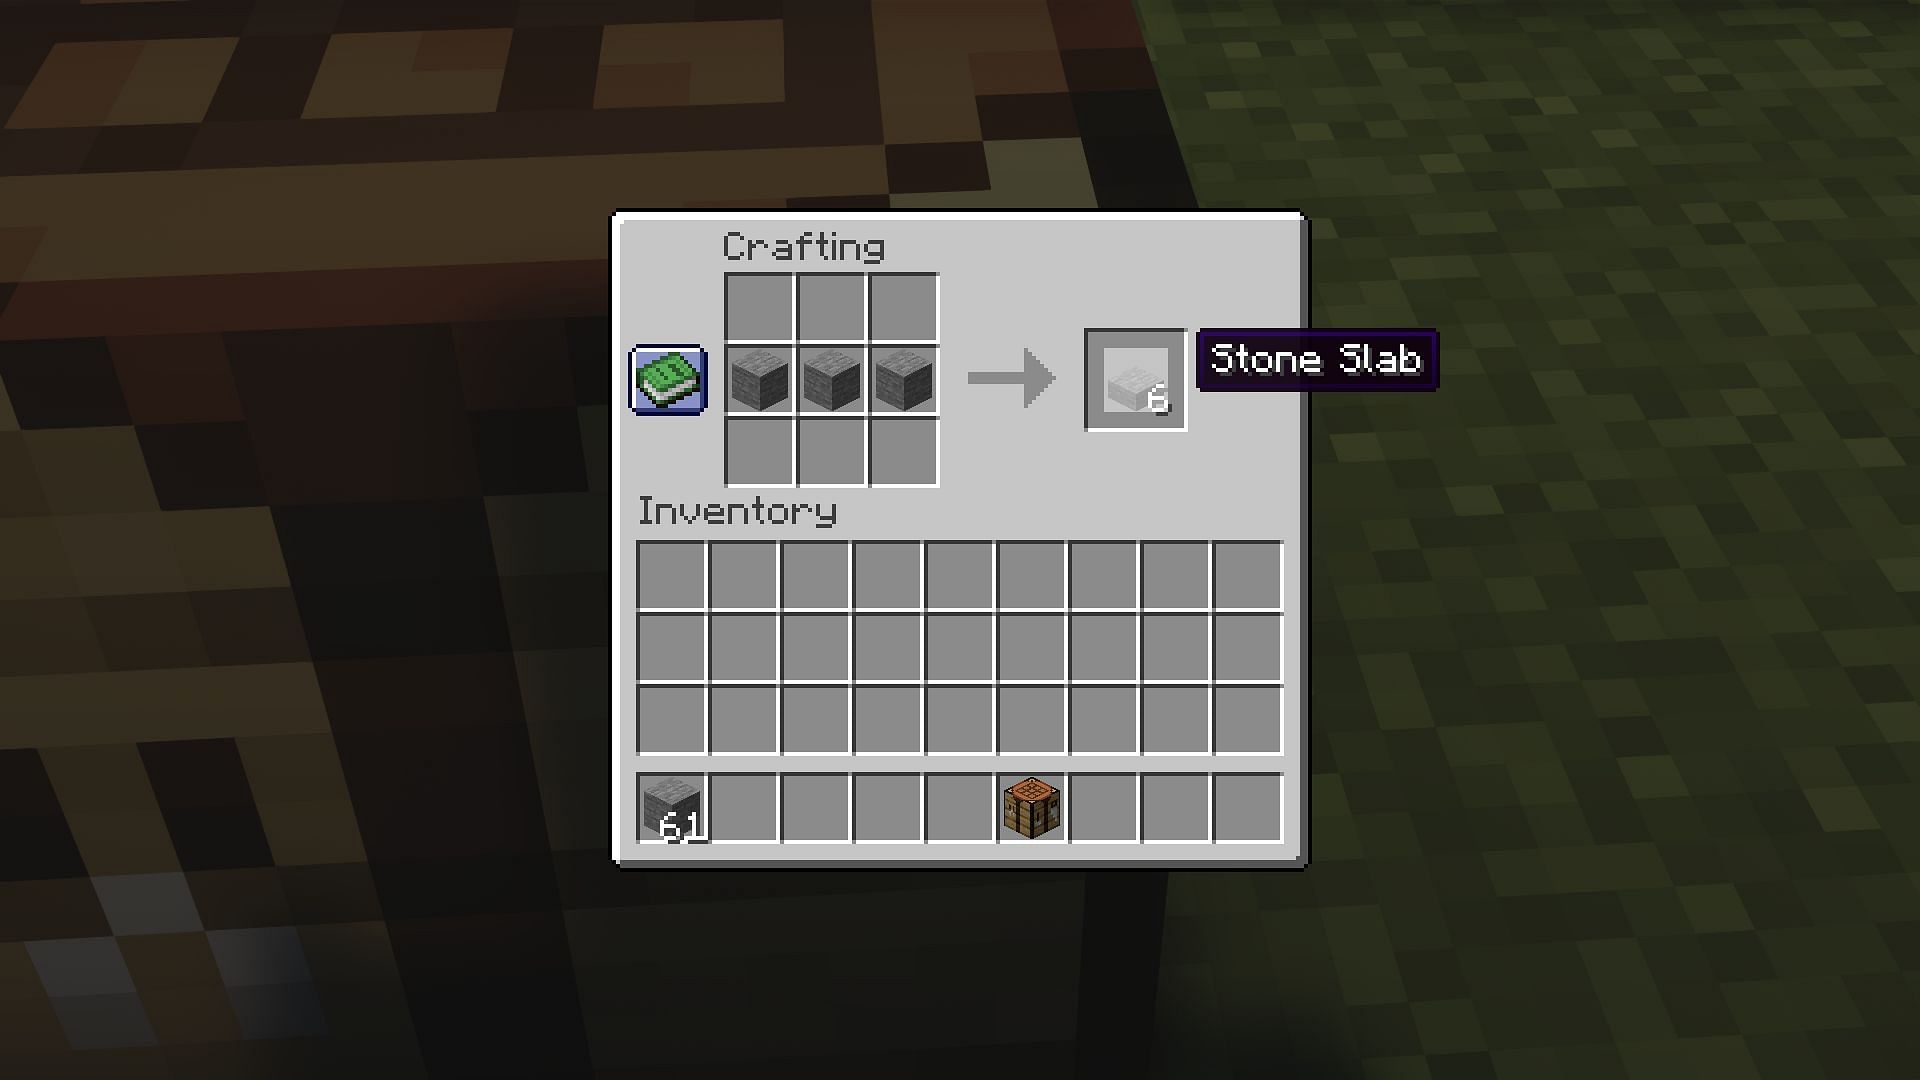 Six stone slabs can be crafted from three regular stone blocks in Minecraft (Image via Mojang)